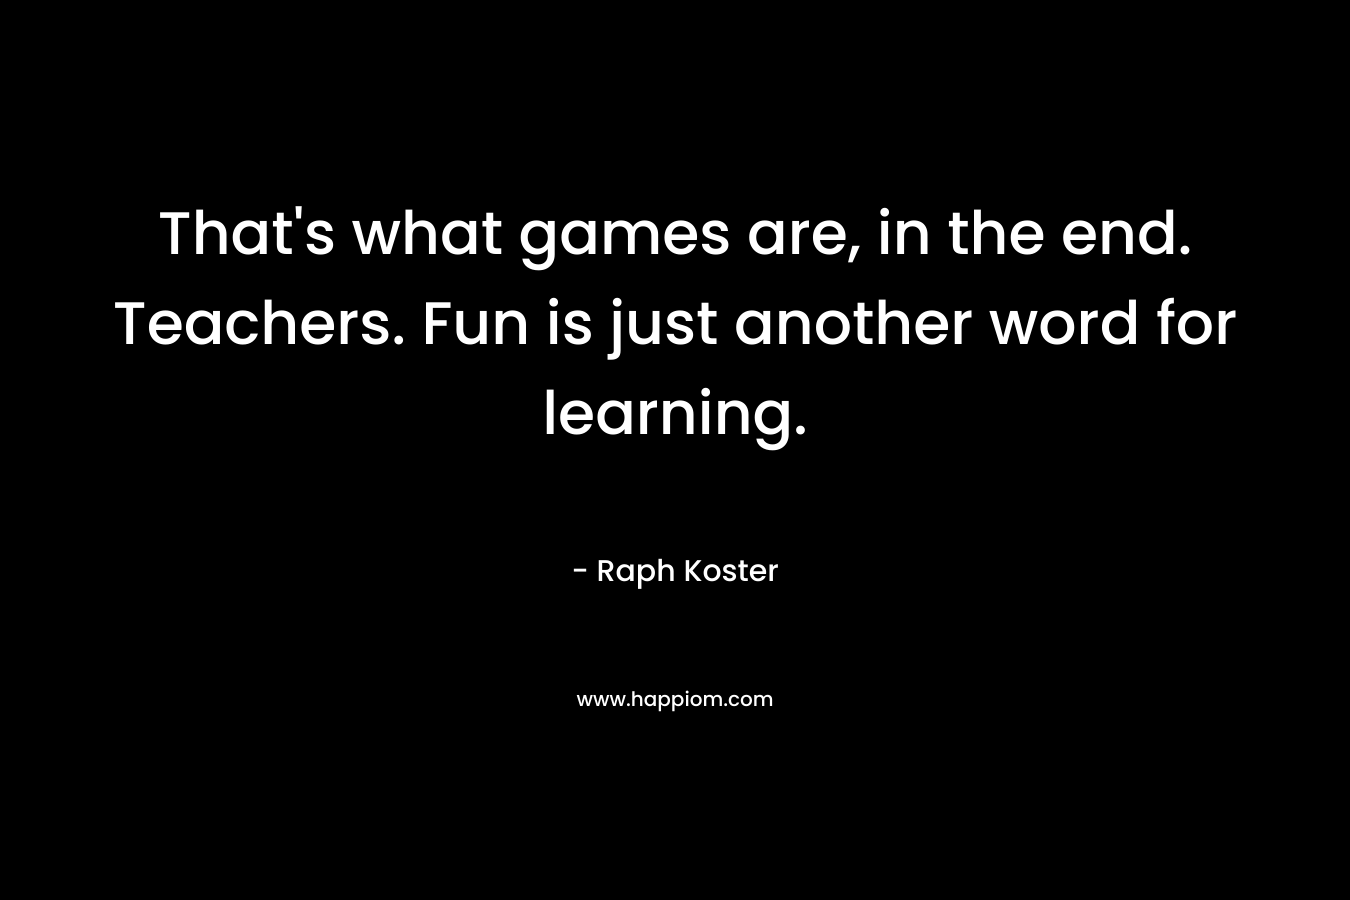 That's what games are, in the end. Teachers. Fun is just another word for learning.